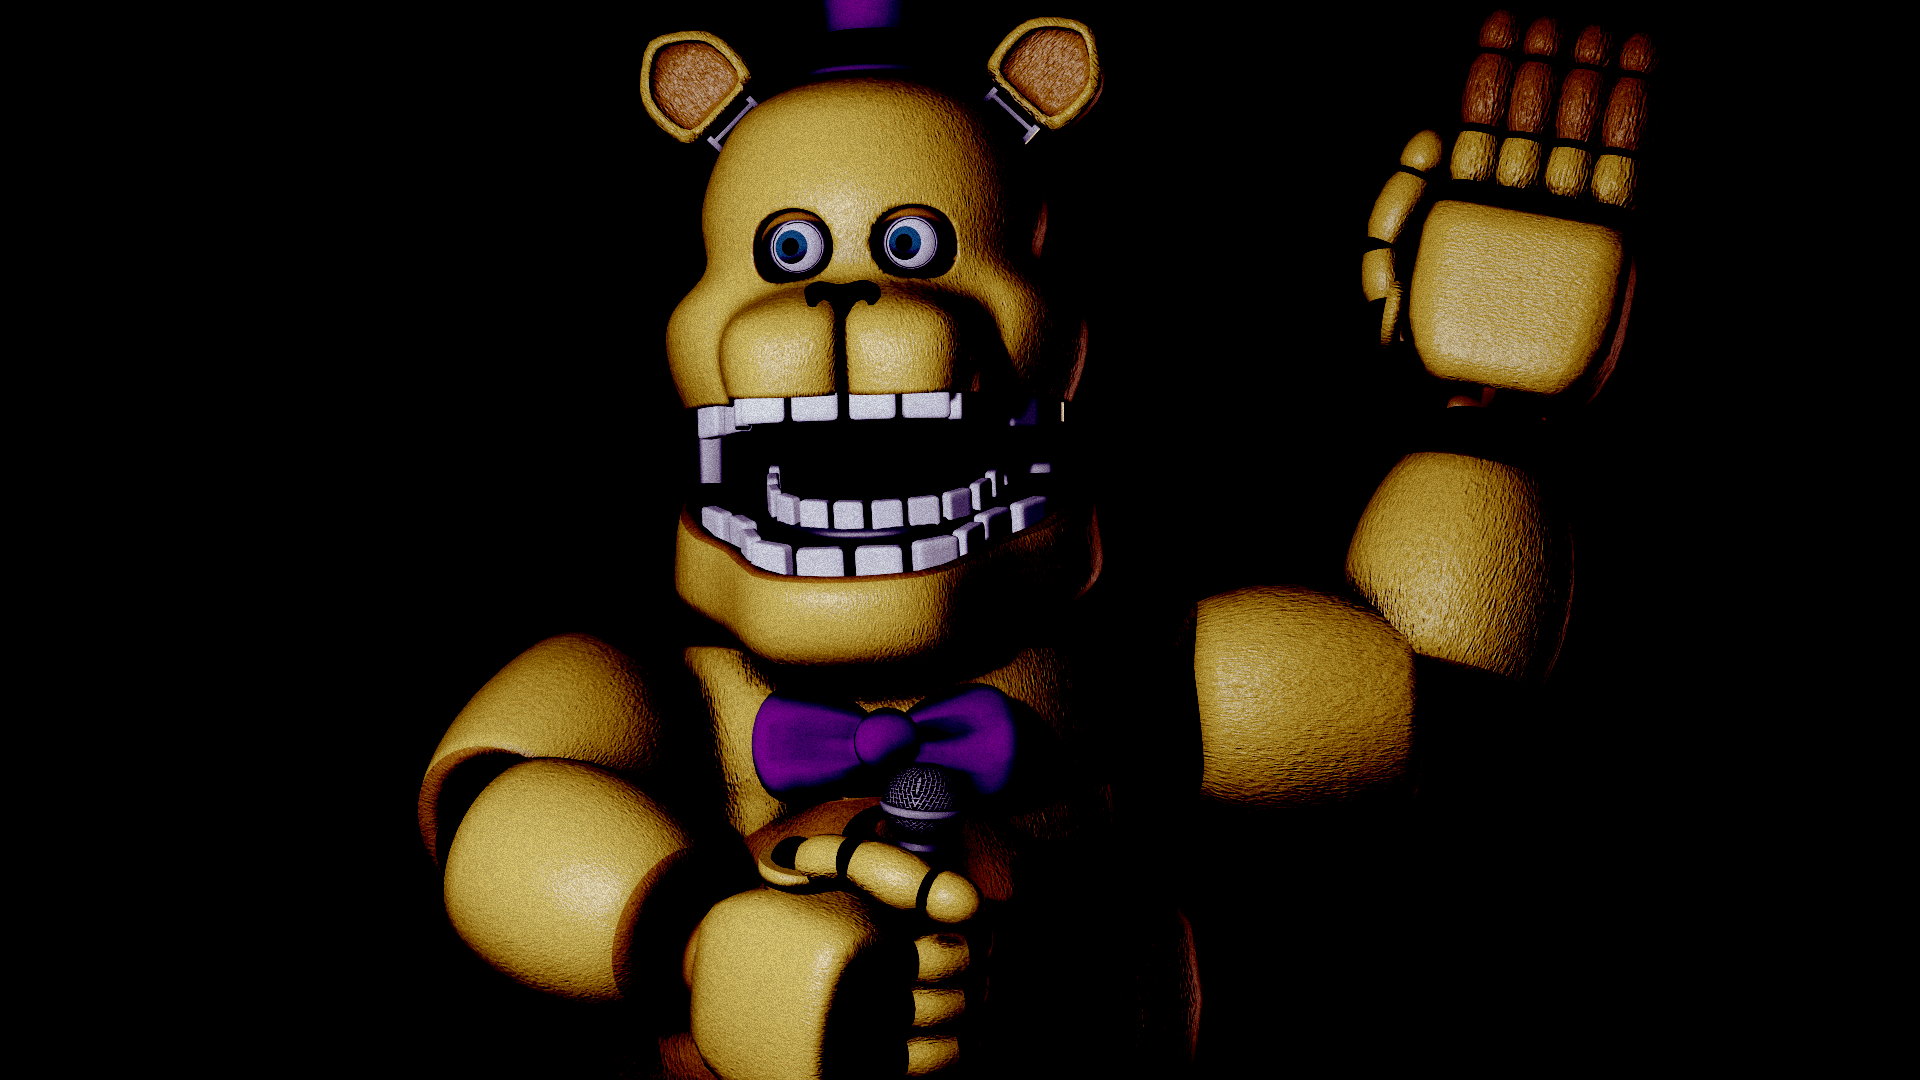 Fnaf 4 fredbear and freddy picture free download